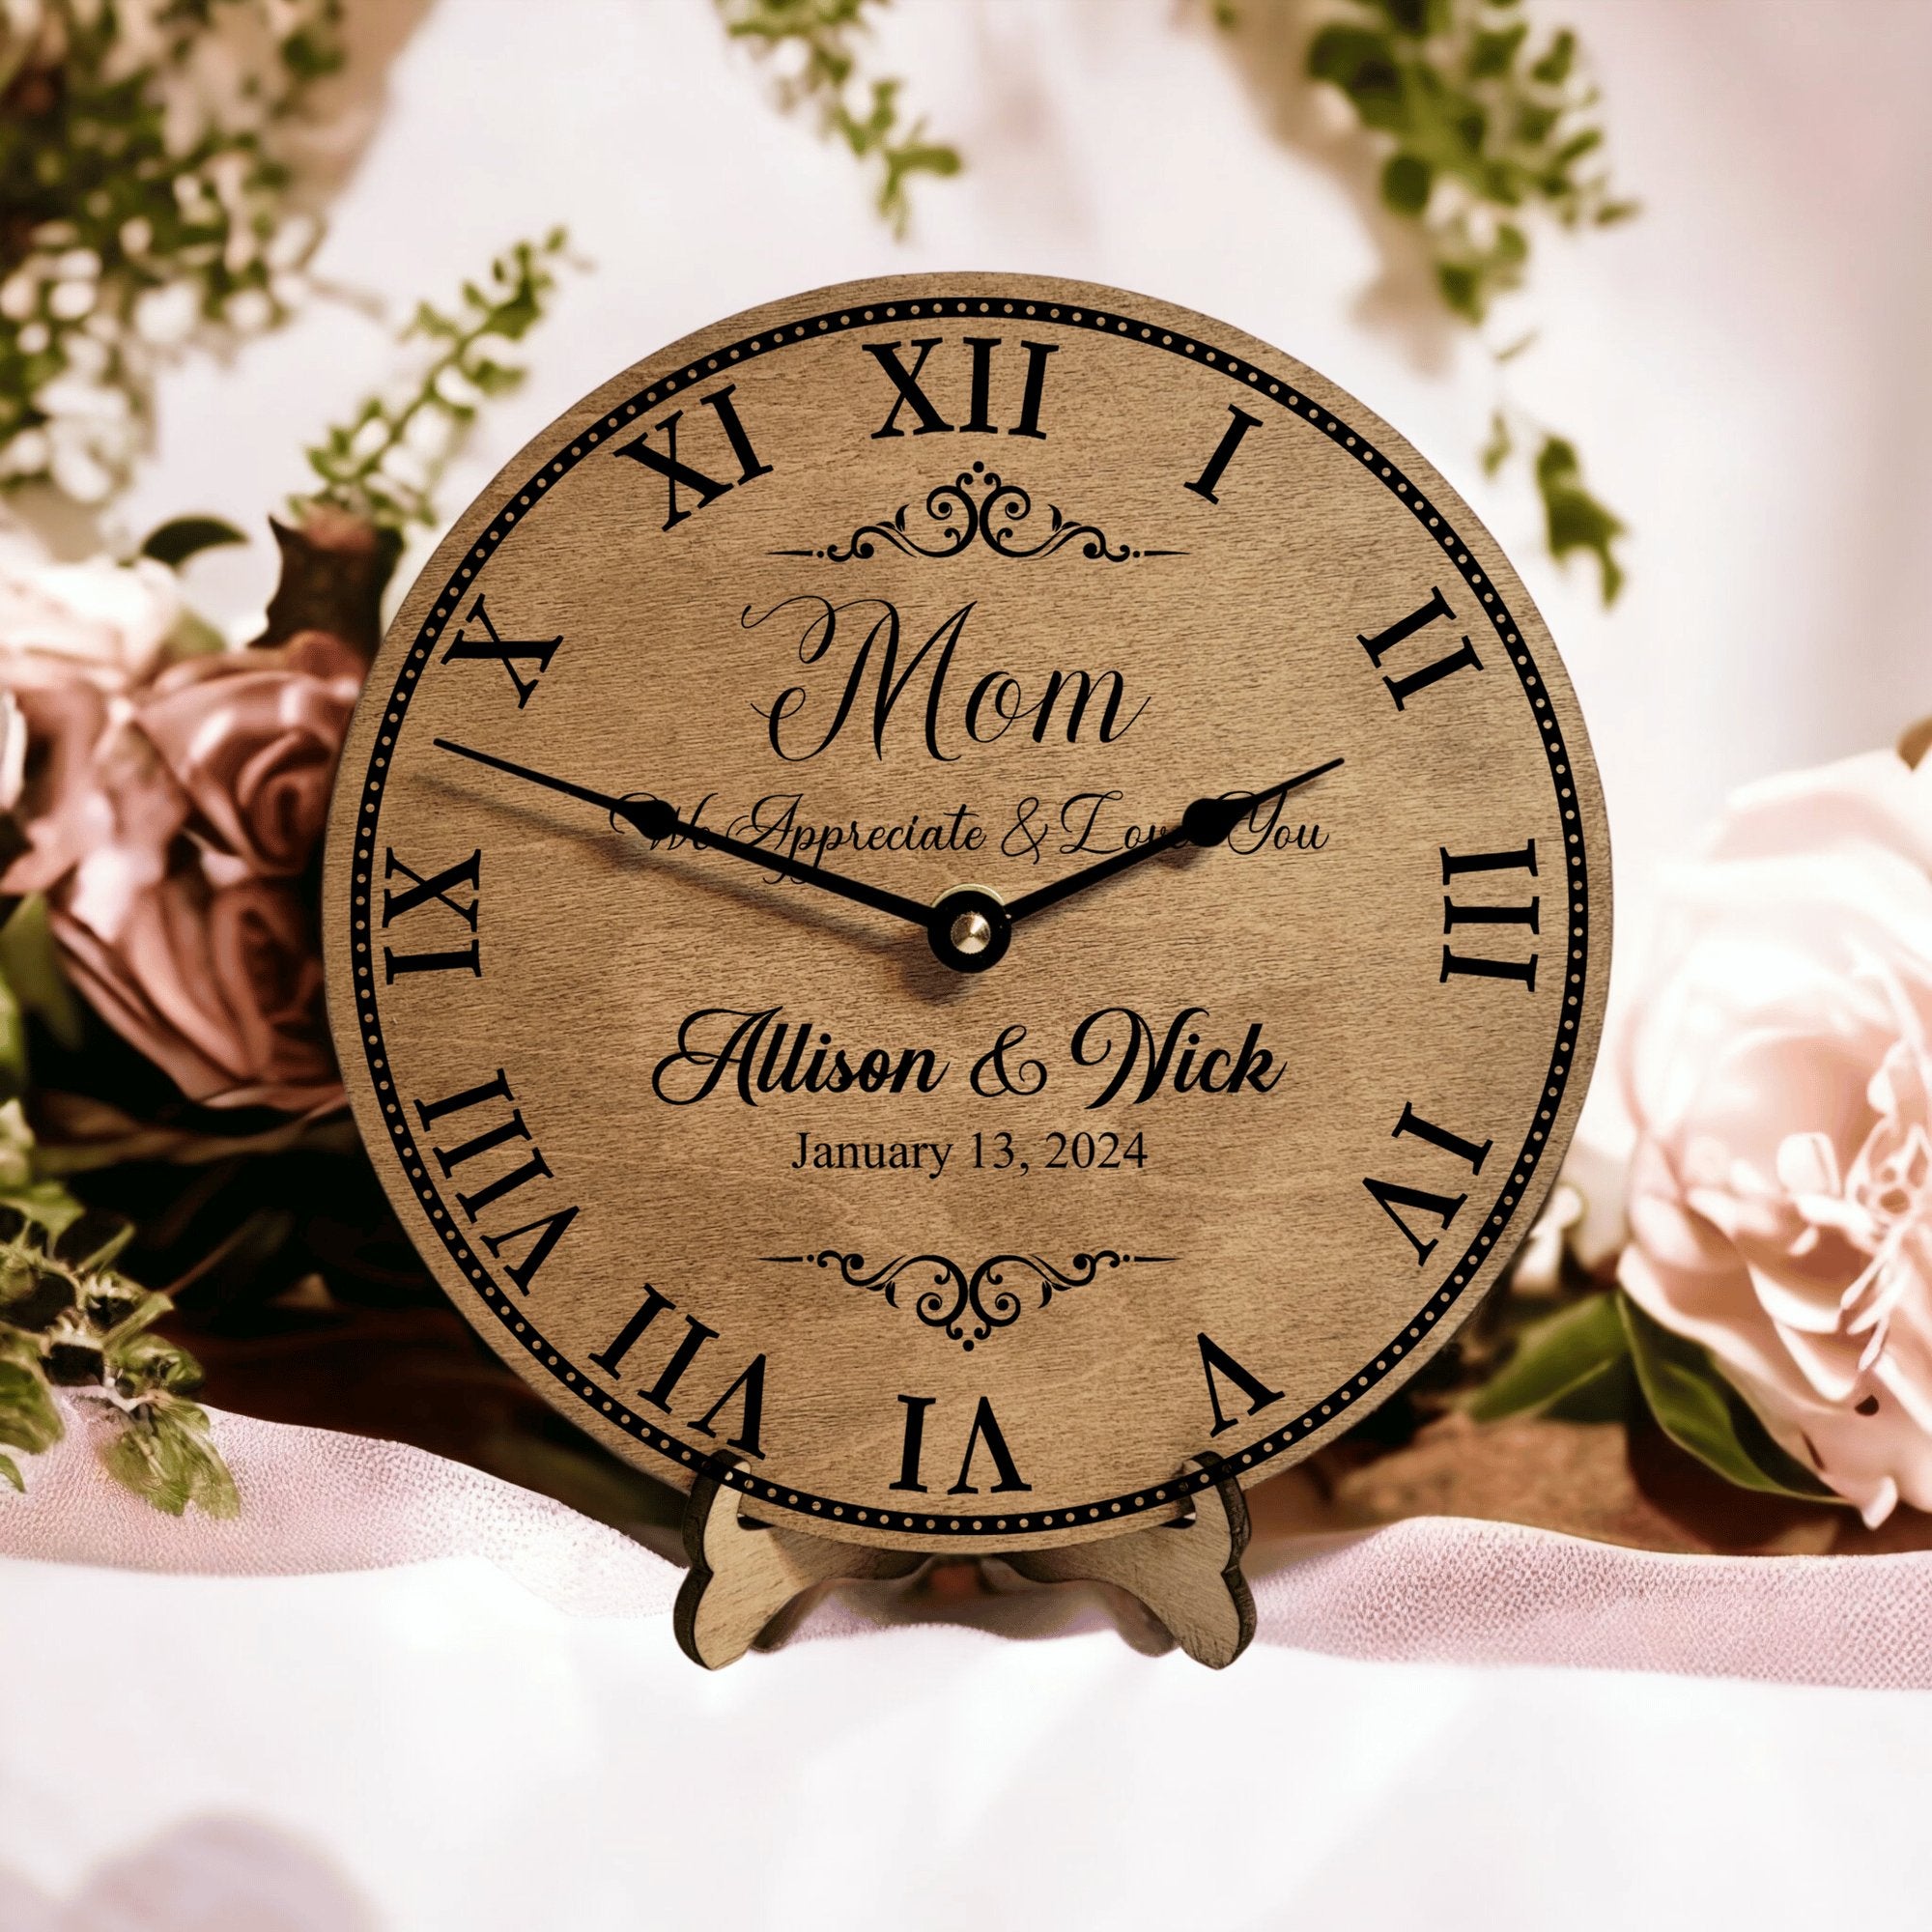 Wedding Day Gift to Mom of the Bride and Groom - Wedding Clock - Designodeal